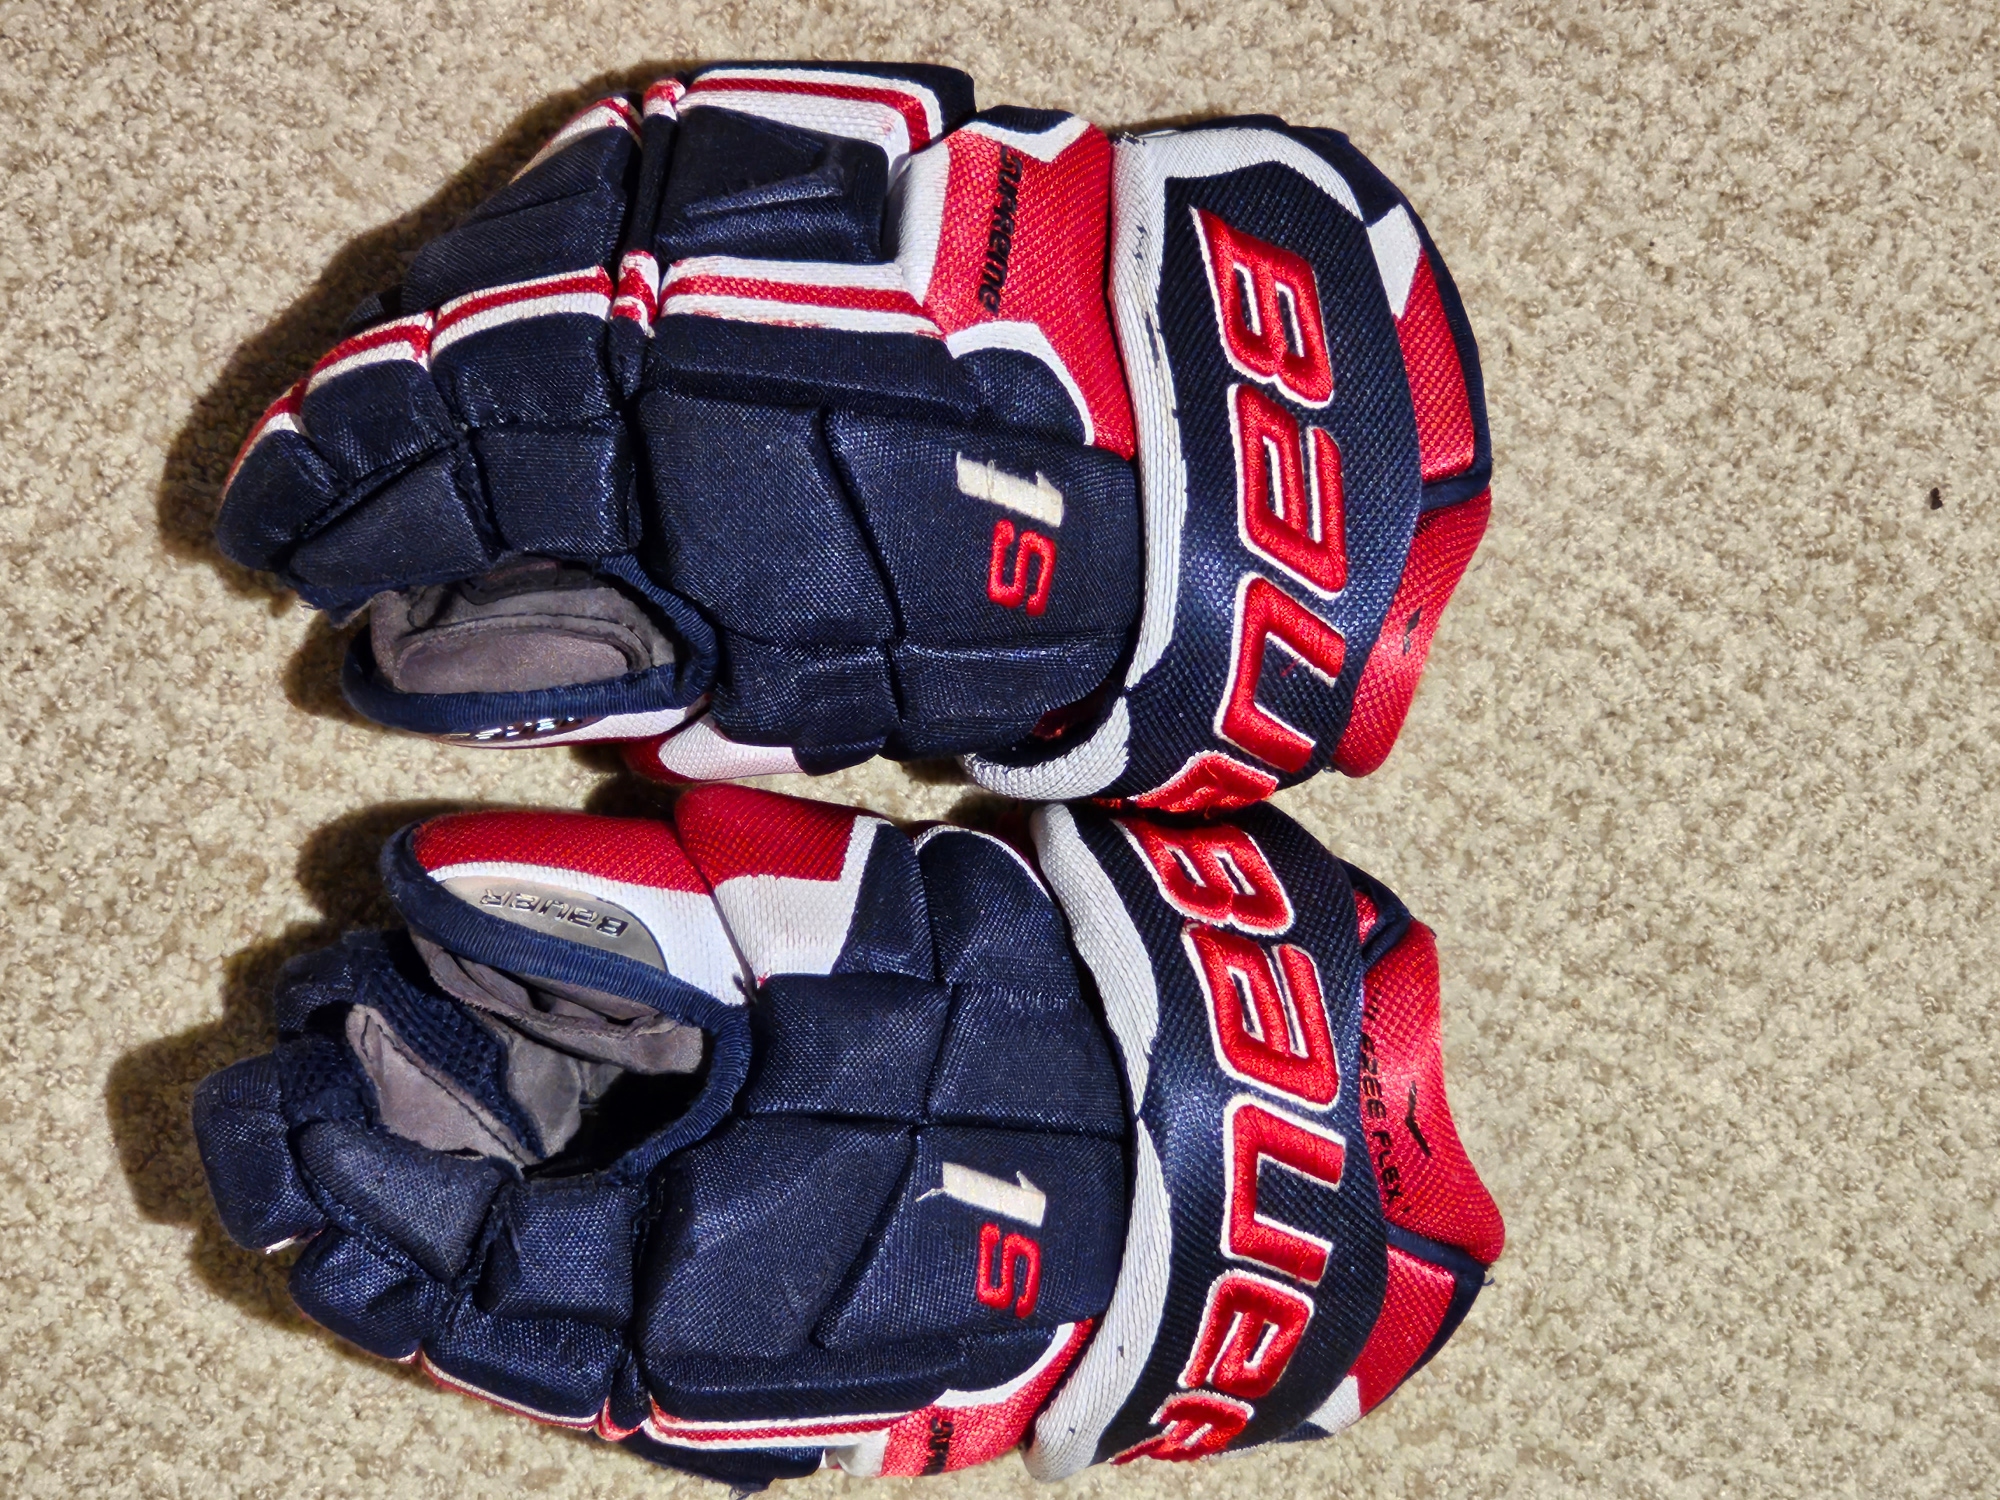 Used Bauer Supreme 1S Gloves 13" - Blue/Red/White